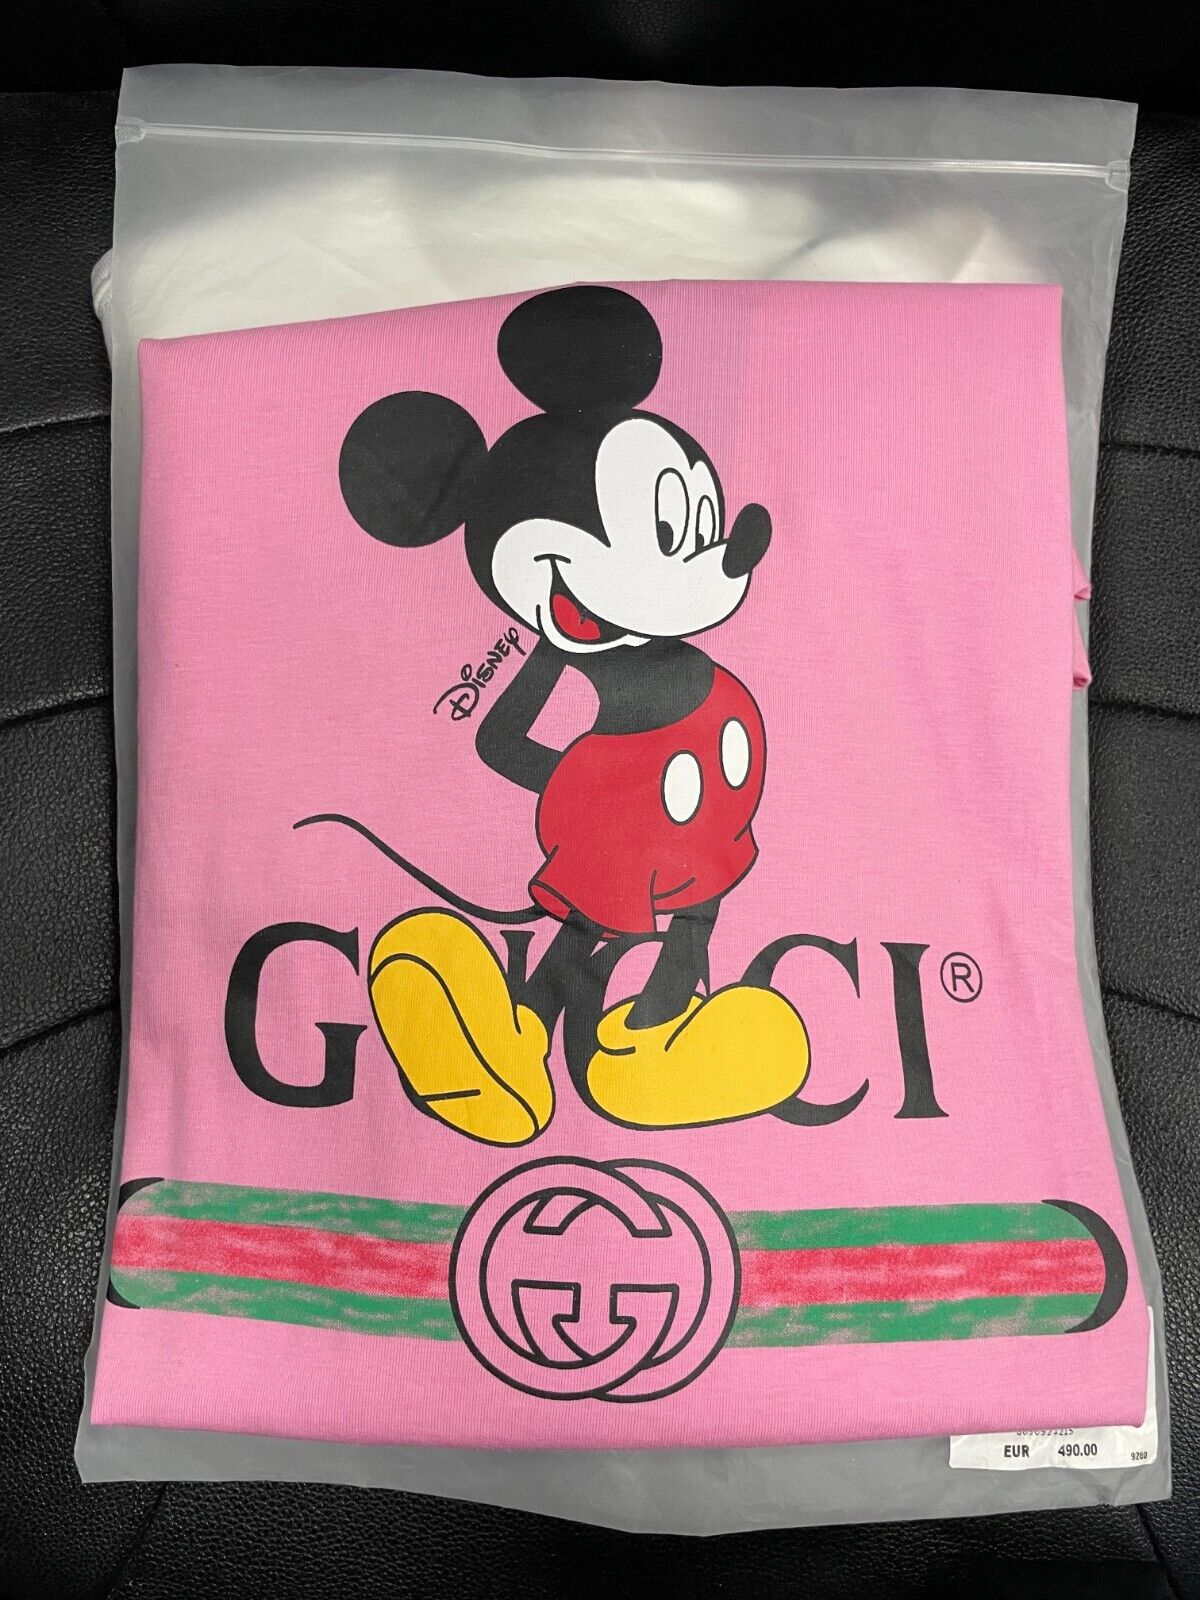 Gucci x Disney Mickey Mouse Shirt 100 YEARS OF DISNEY - size Large